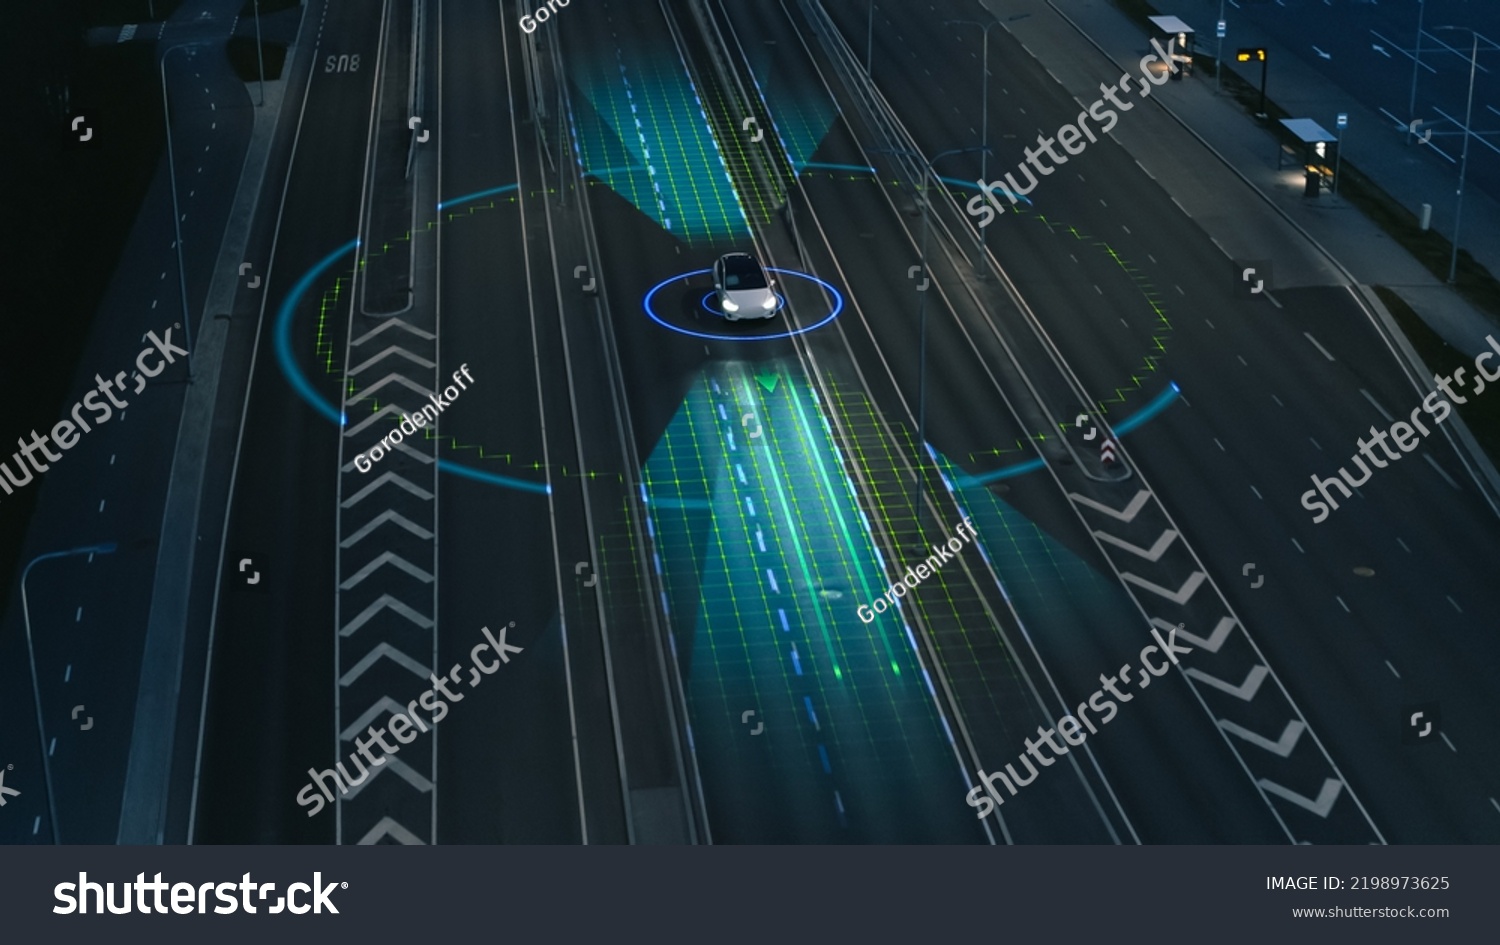 Following Aerial Drone View: Autonomous Self Driving Car Moving Through City Highway. Visualization Concept: Sensor Scanning Road Ahead for Vehicles, Danger, Speed Limits. Evening Urban Driveway #2198973625